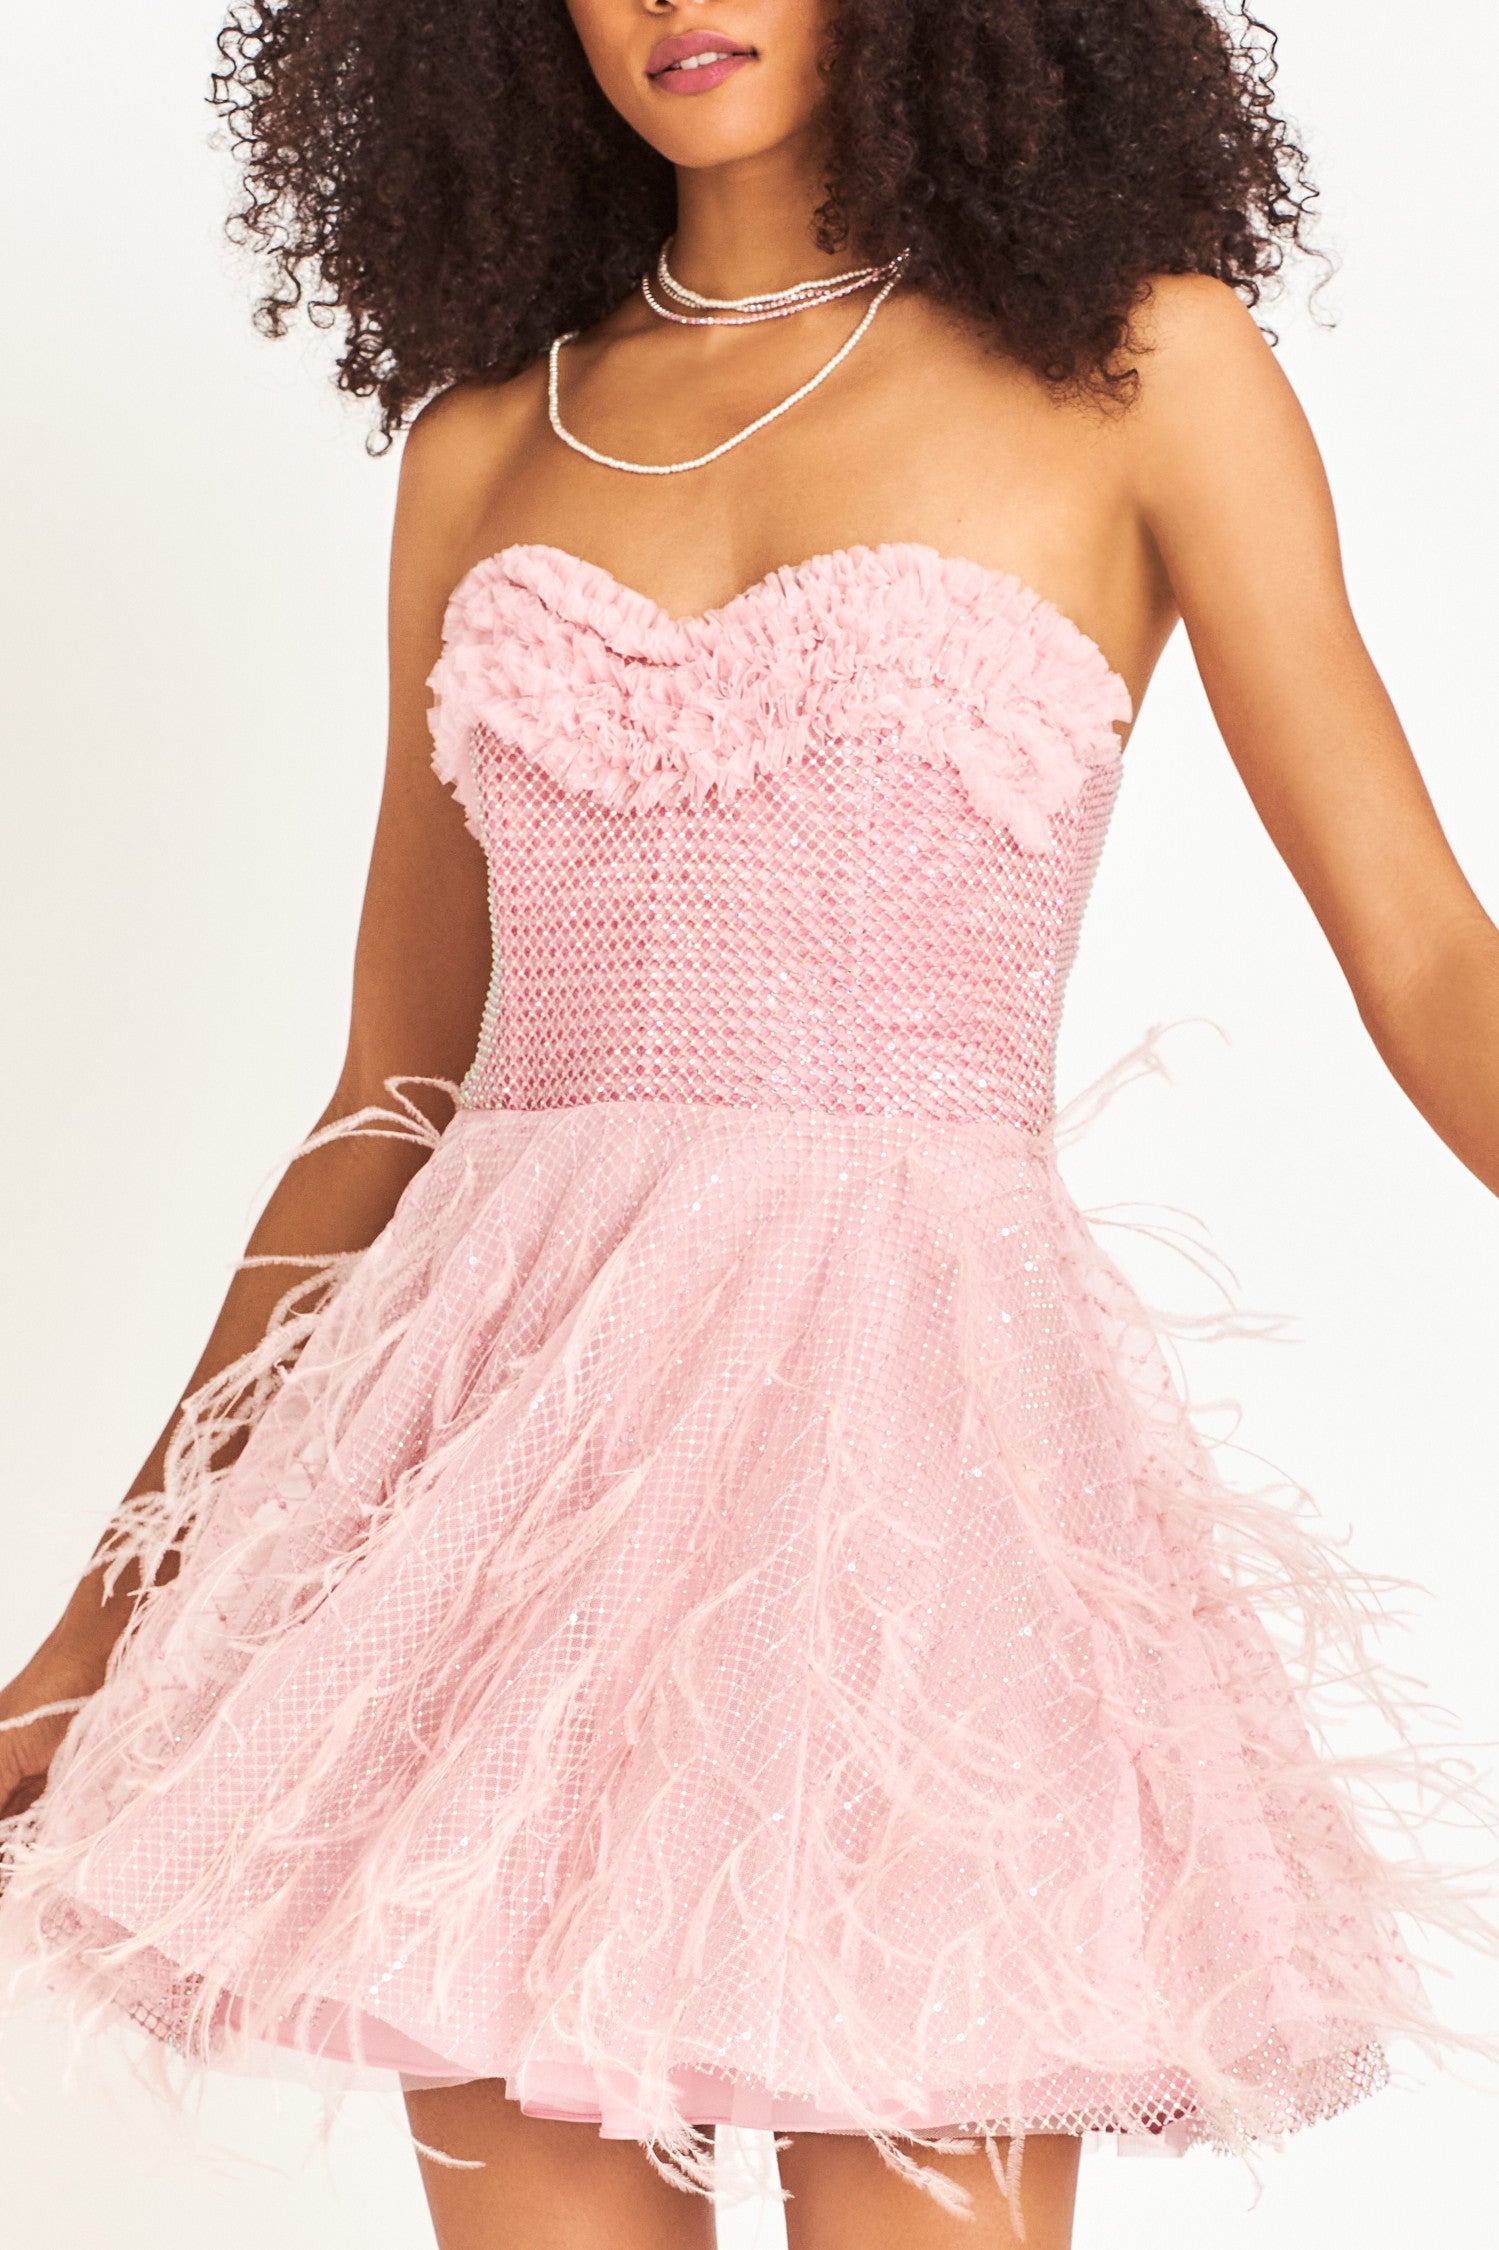 Pink mini dress with structured bodice, boning, and a multi-layered skirt with feathers